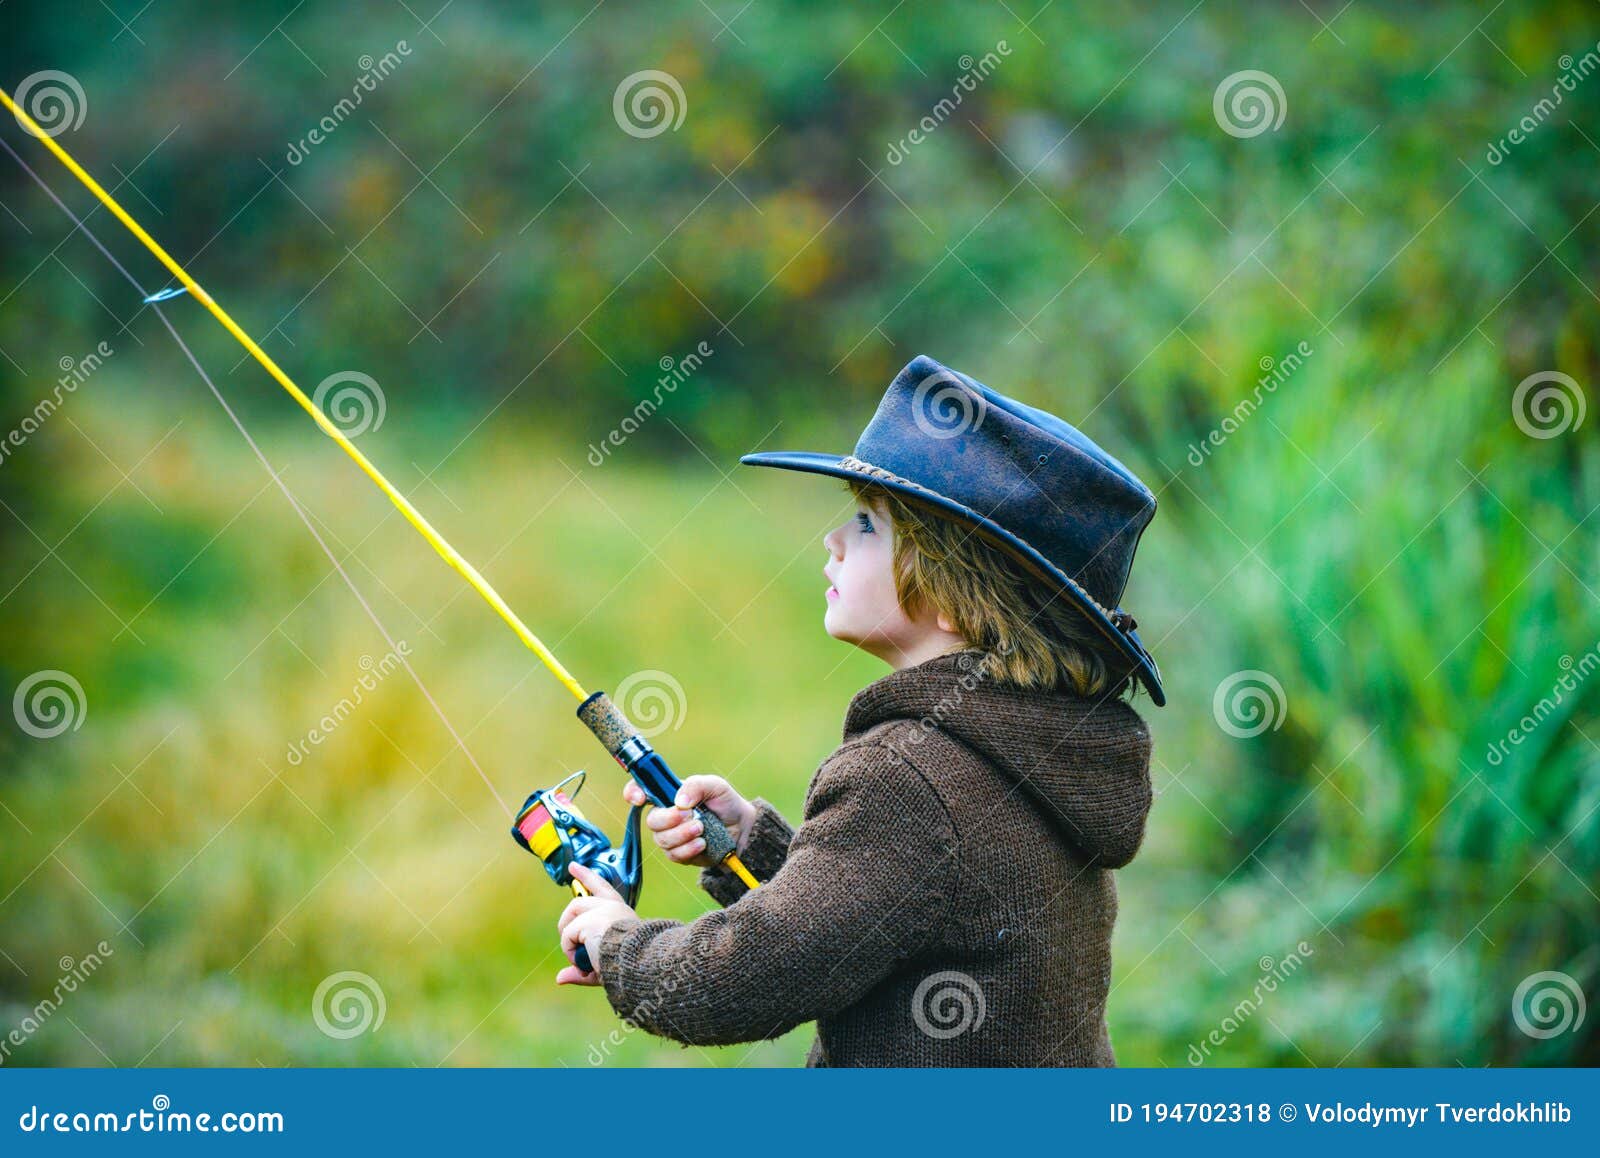 Kid with Fishing Rod at Lake. Little Boy Catching a Fish Stock